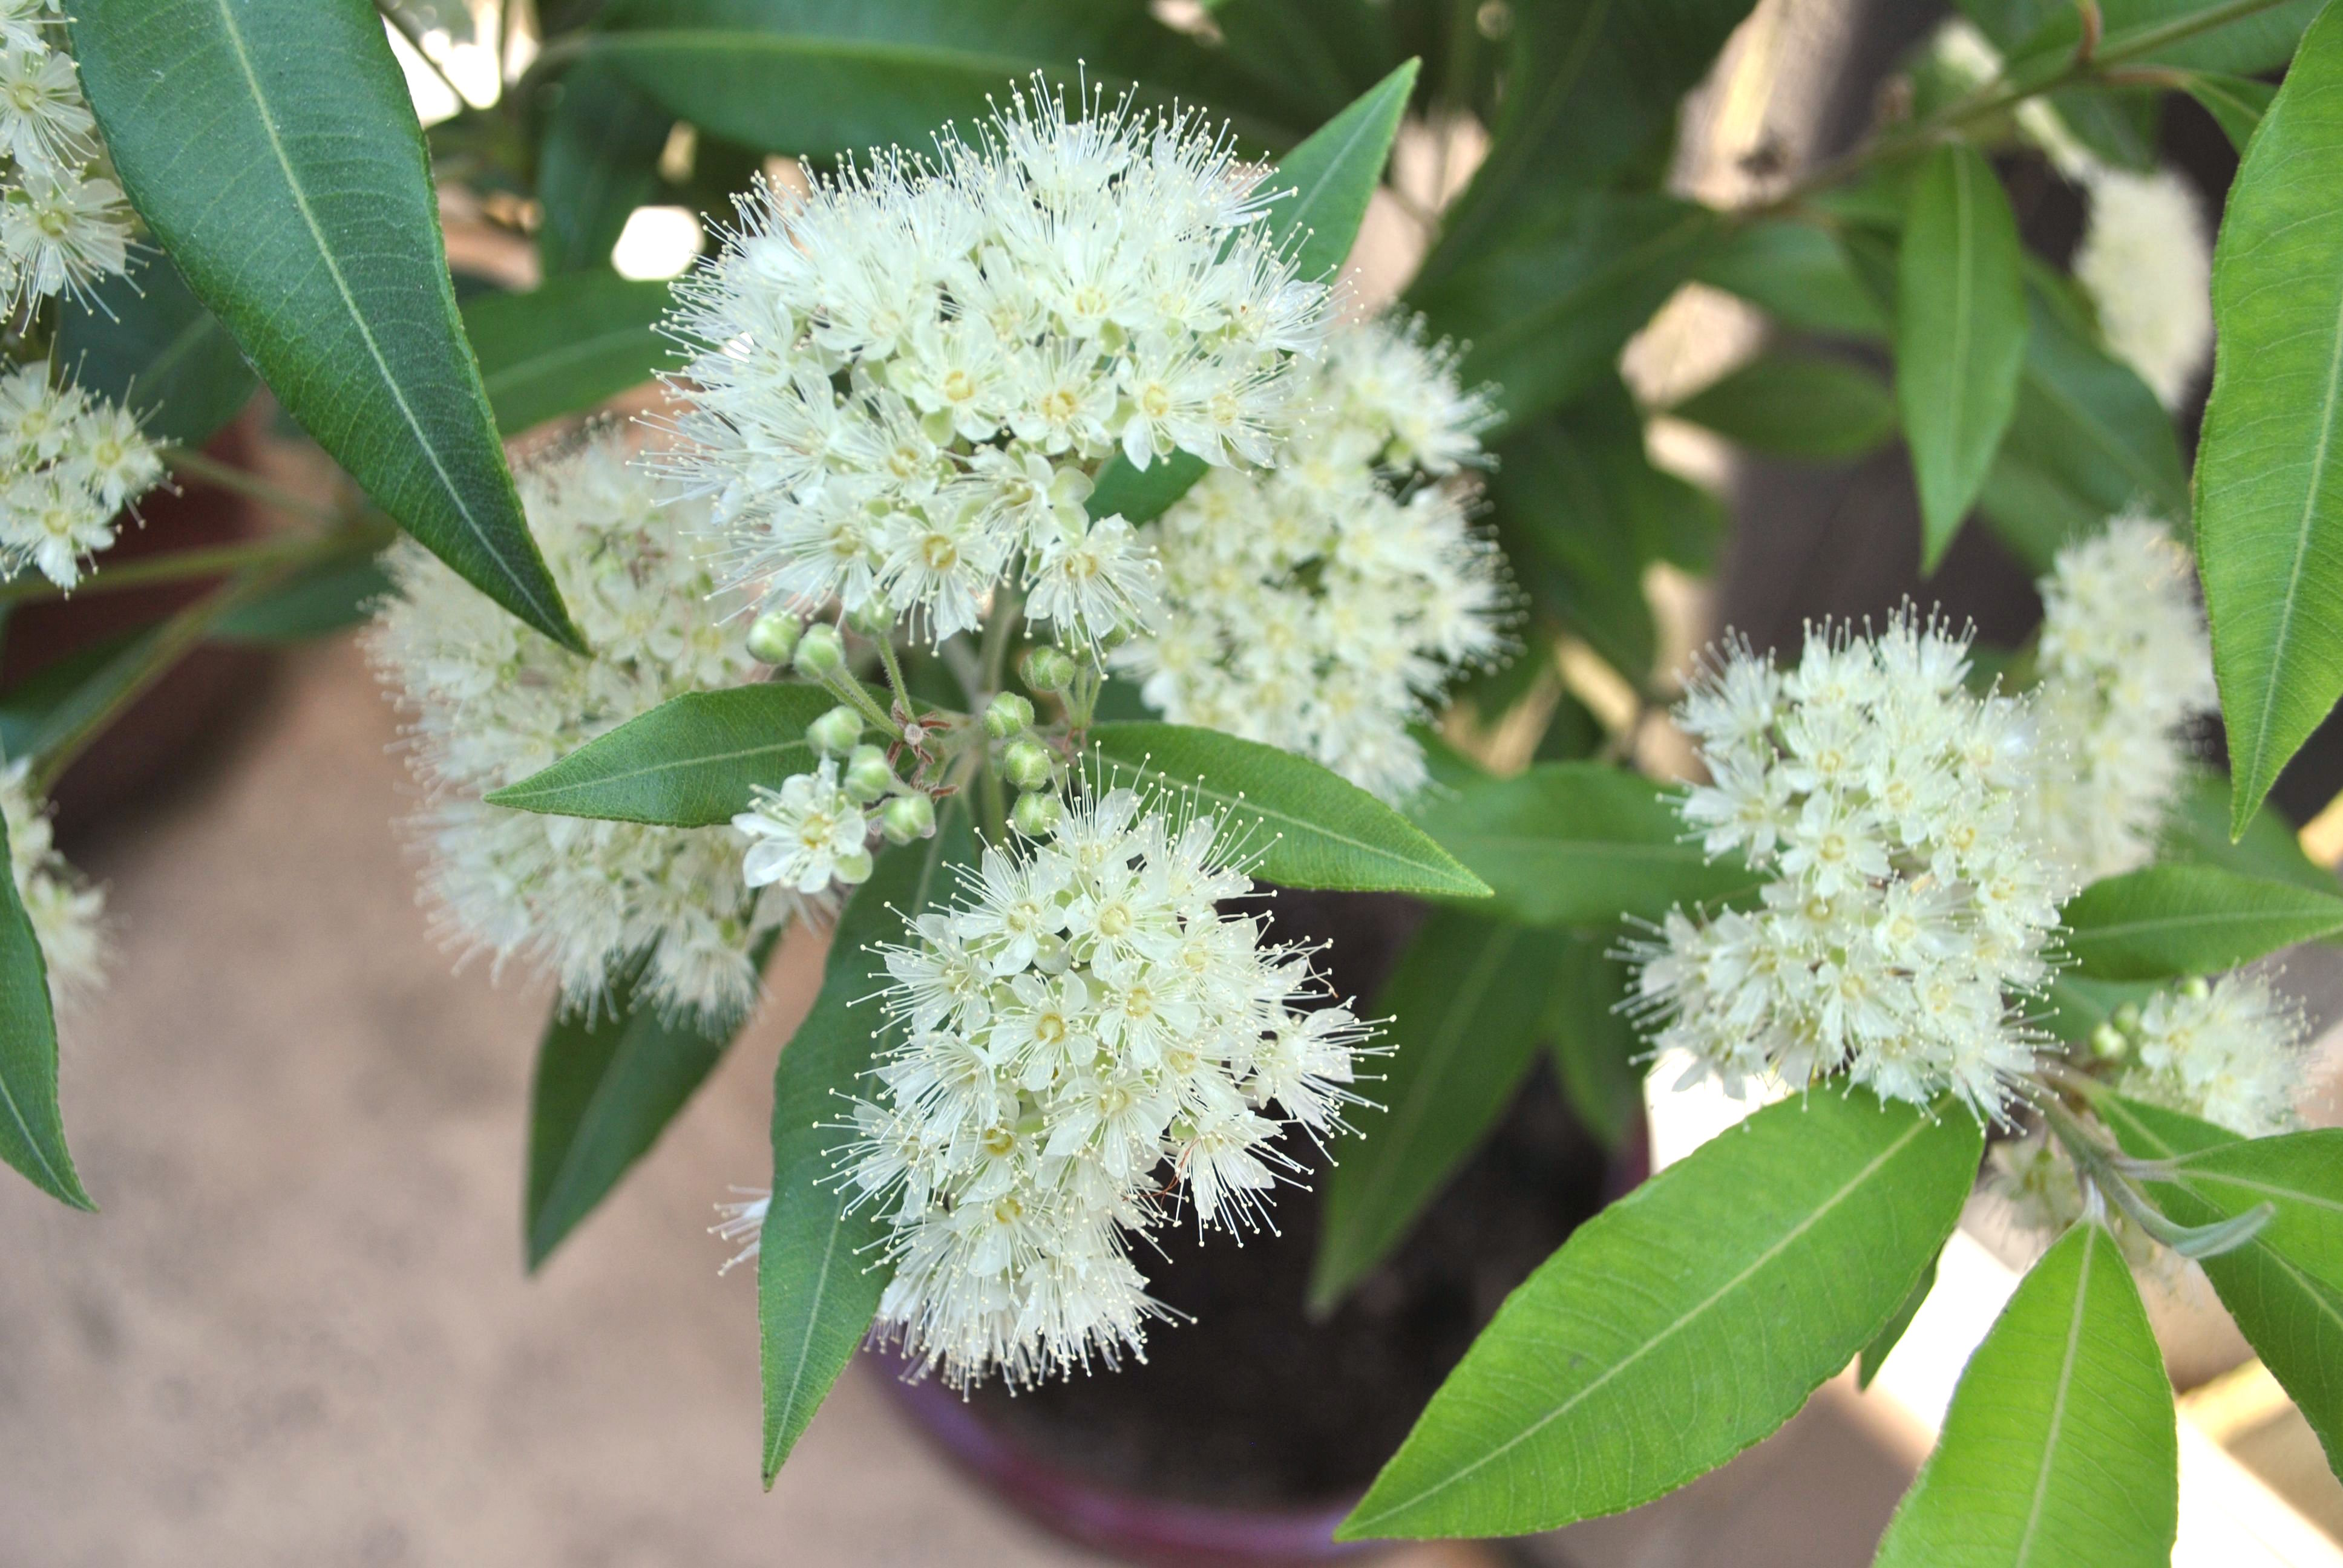 Grow your own lemon myrtle – small green things